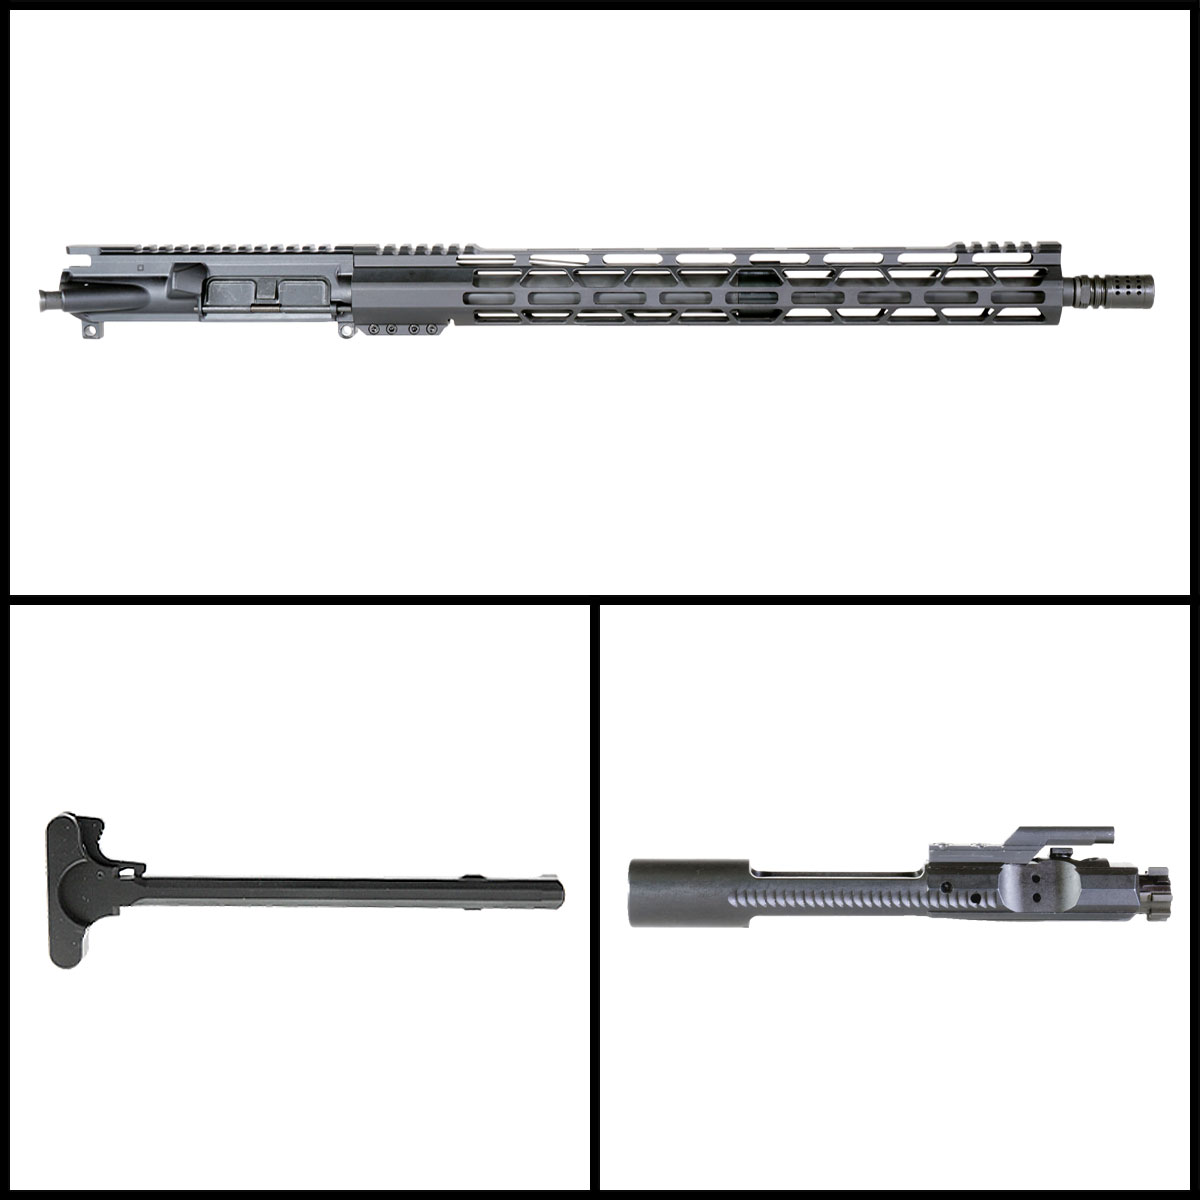 DDS 'Chaos Ultima' 18-inch AR-15 .450 Bushmaster Phosphate Rifle Complete Upper Build